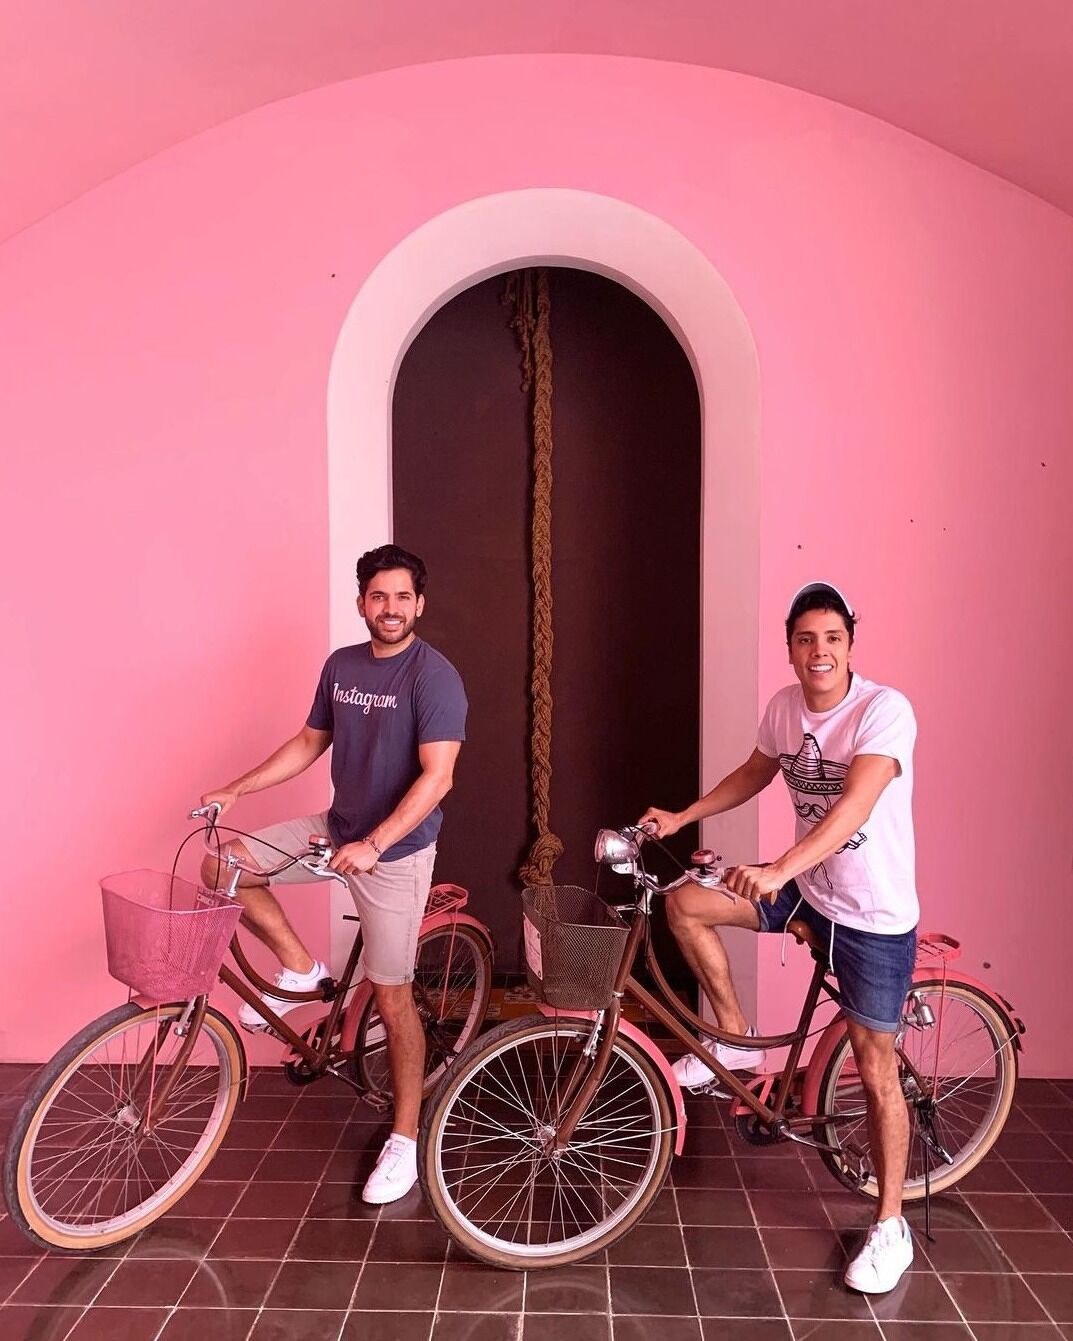 Two handsome men pose with bikes in front of a pink wall.